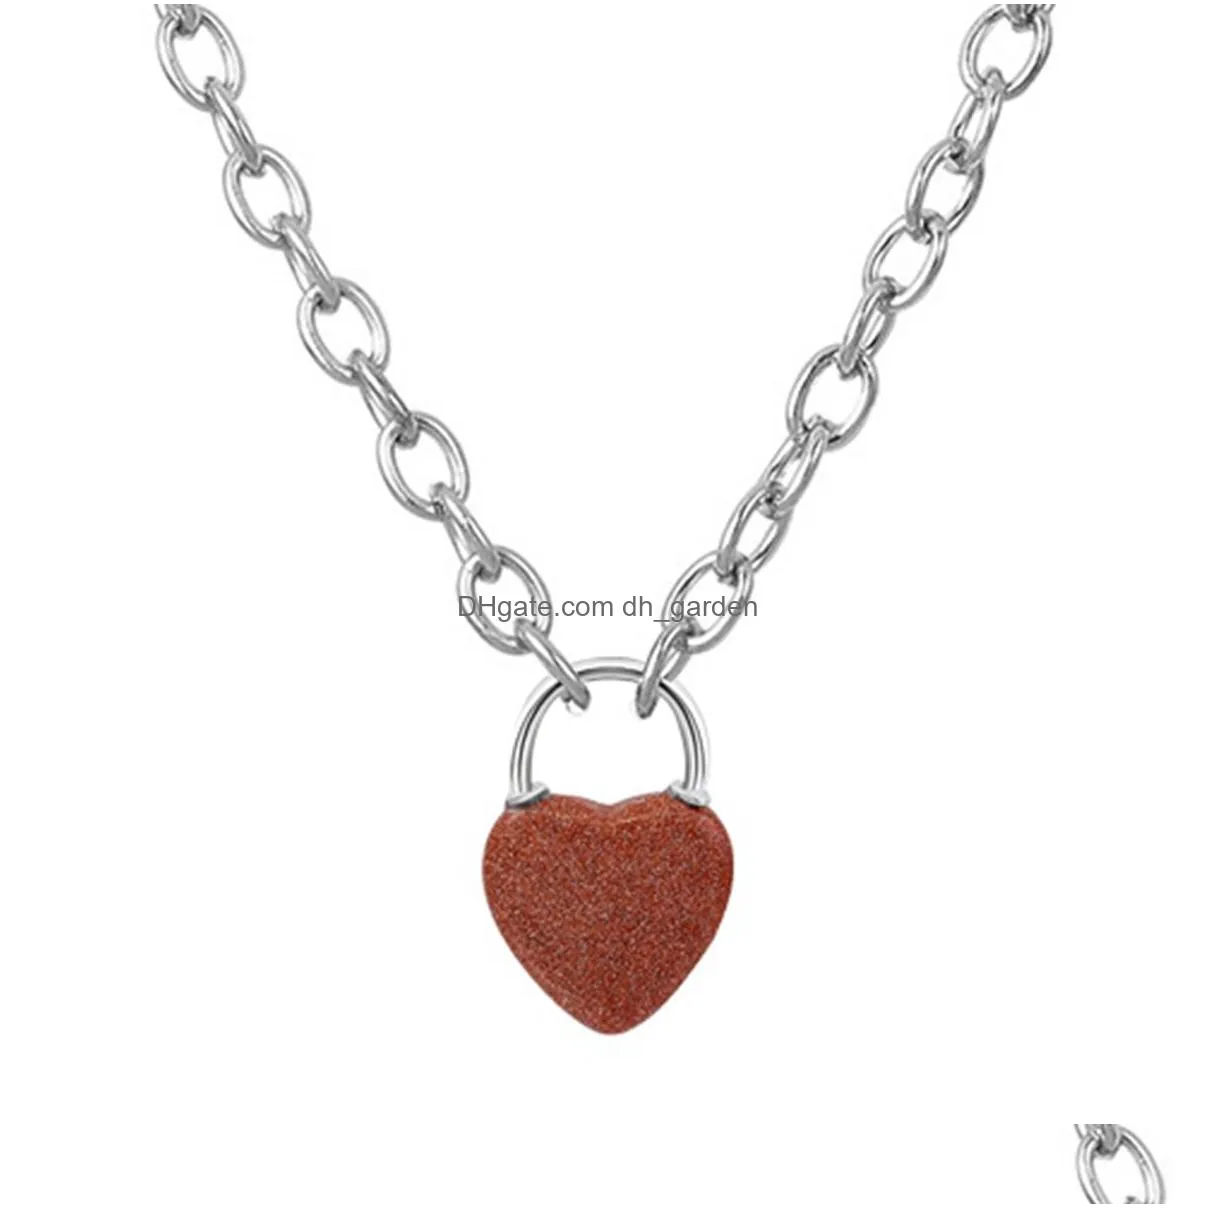 good quality natural crystal gemstone love heart lock charm pendant necklace with alloy chain for men and women